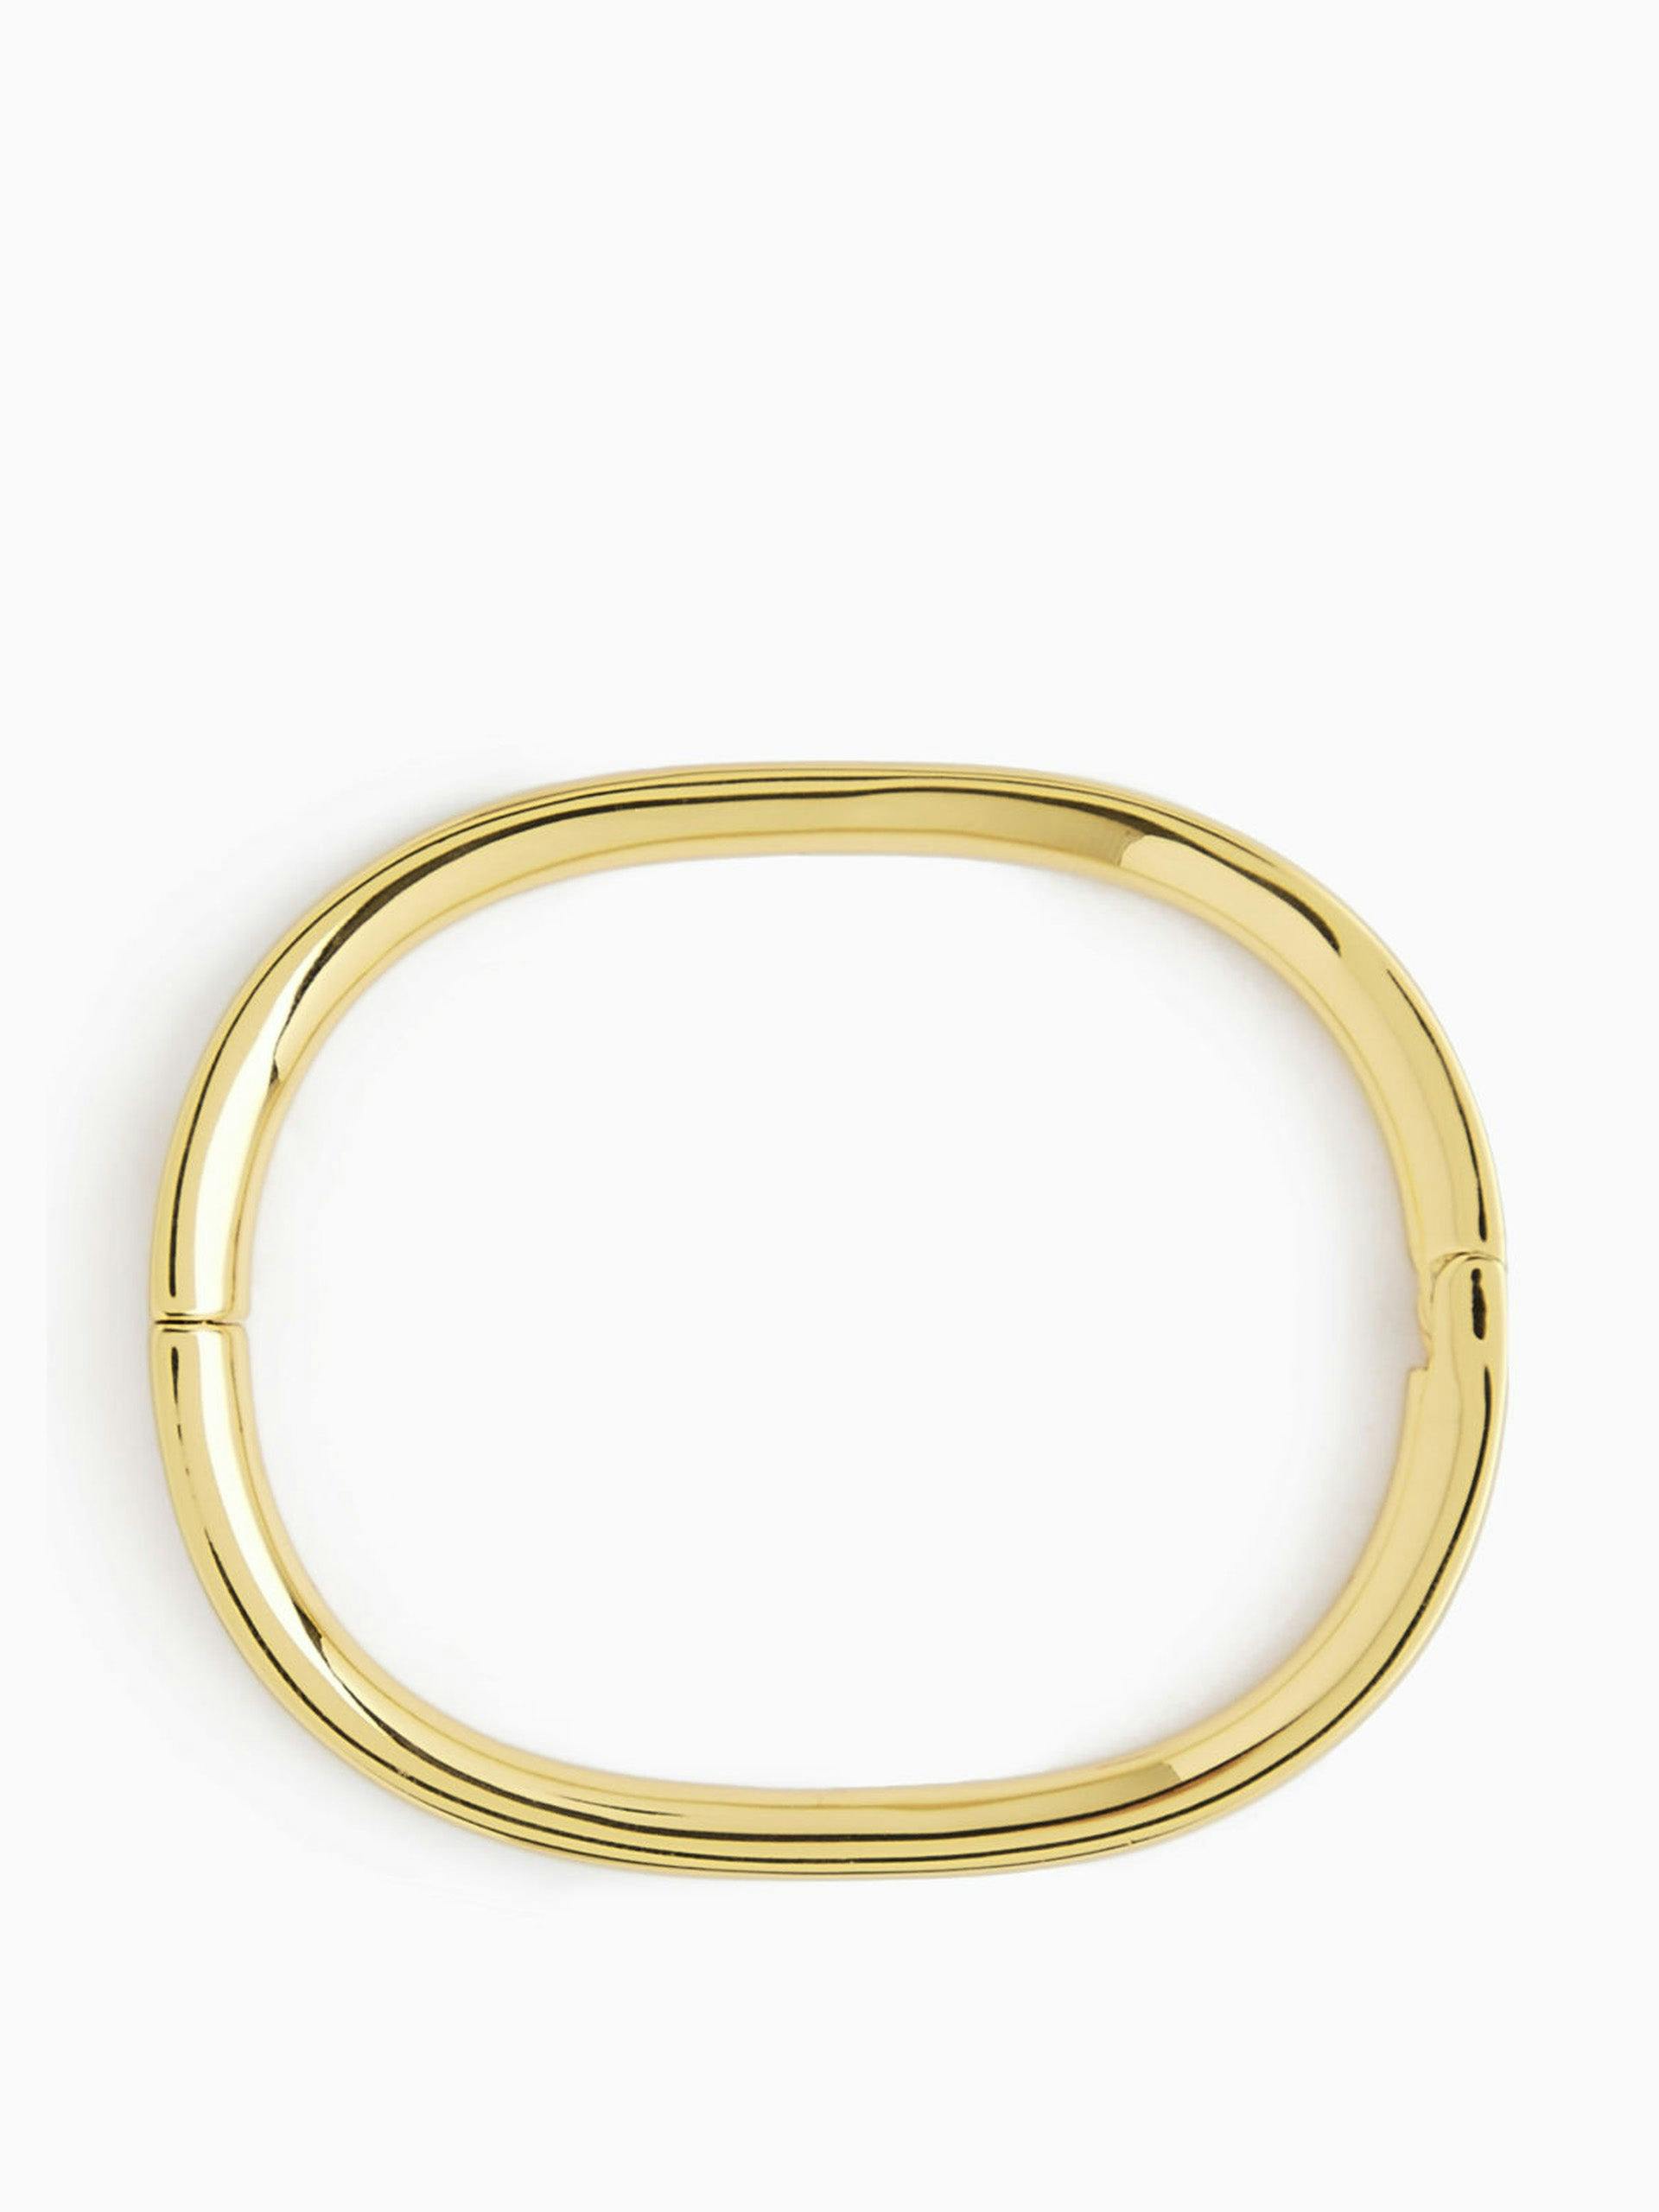 Recycled brass hinged bangle